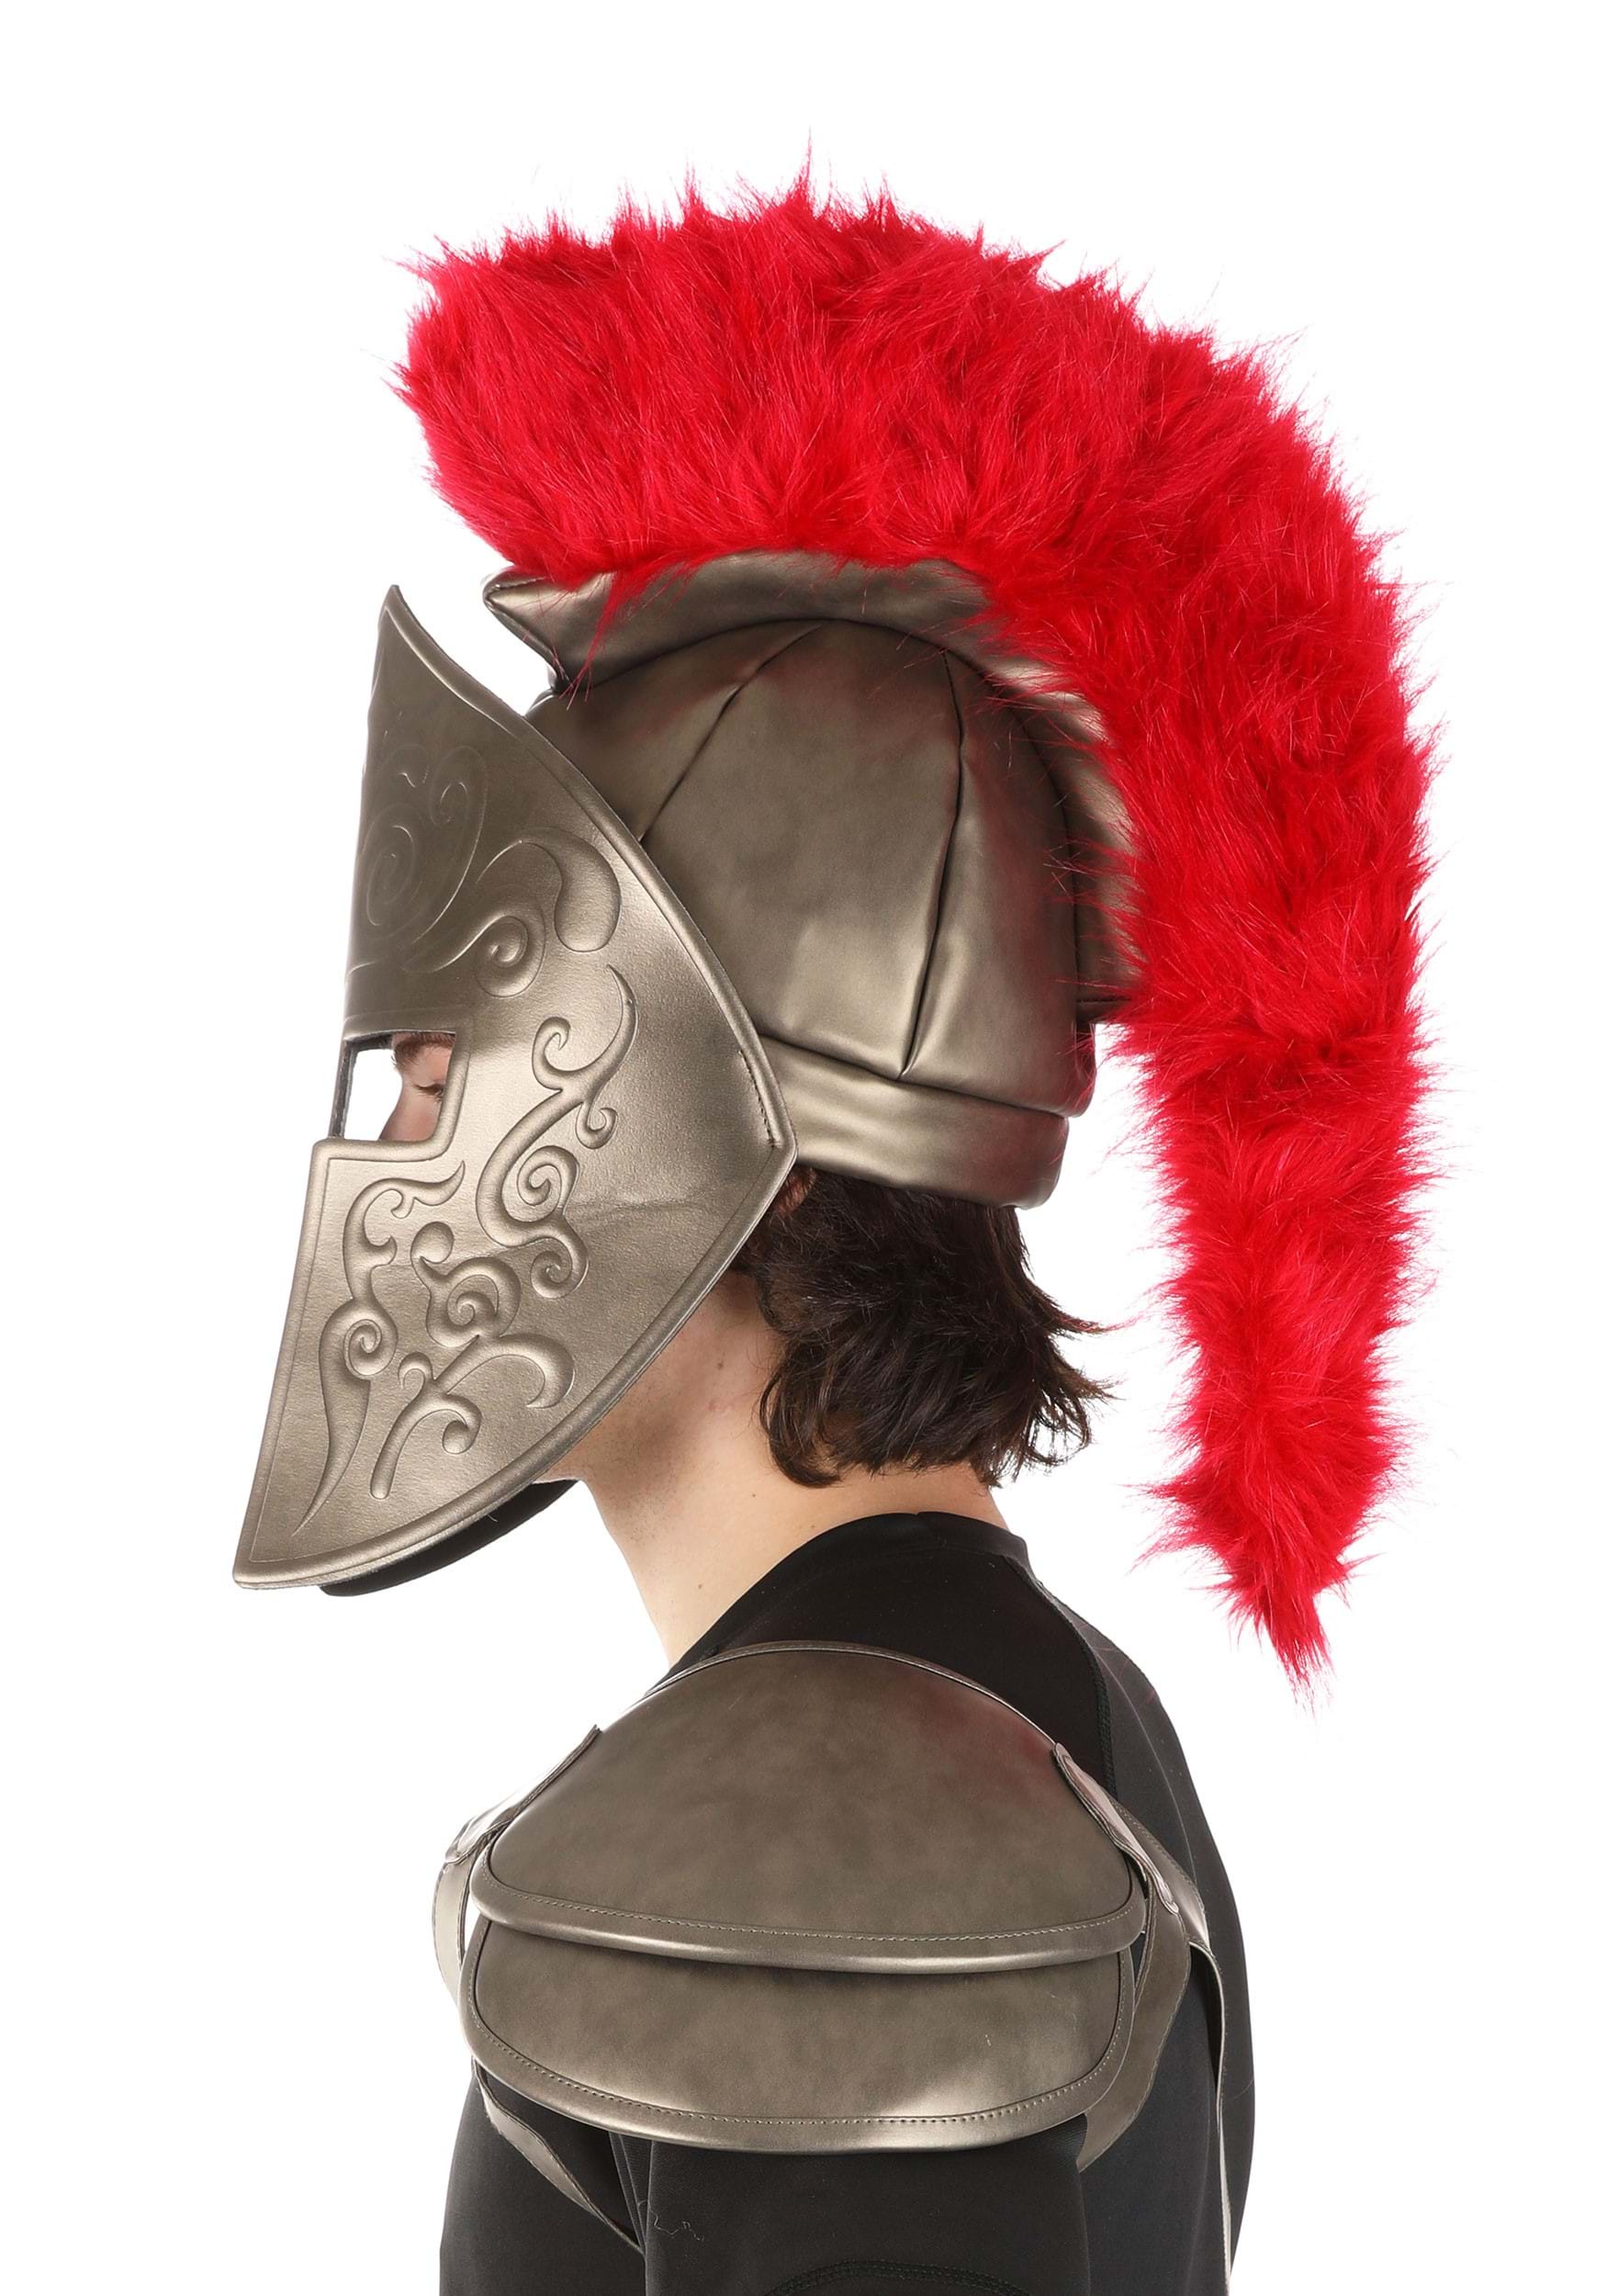 Ares Costume Accessory Kit